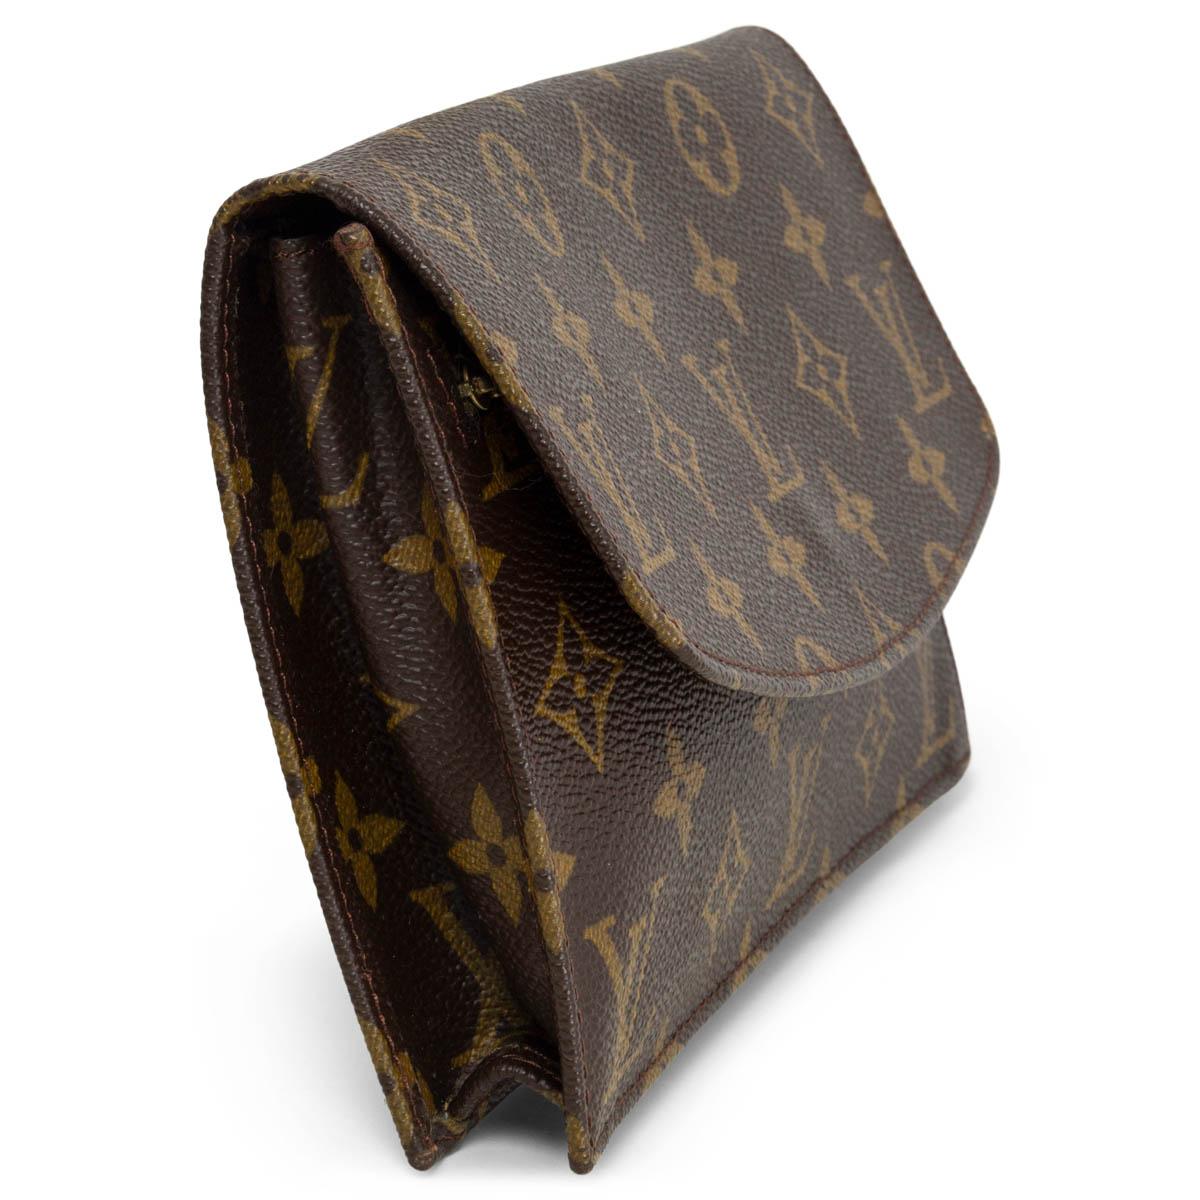 100% authentic Louis Vuitton Rabat Clutch in brown and olive green Monogram canvas. Open with a push button and has a zipper pocket under the flap. Lined in brown faux leather with a slip pocket under the flap. Has been carried and is in excellent